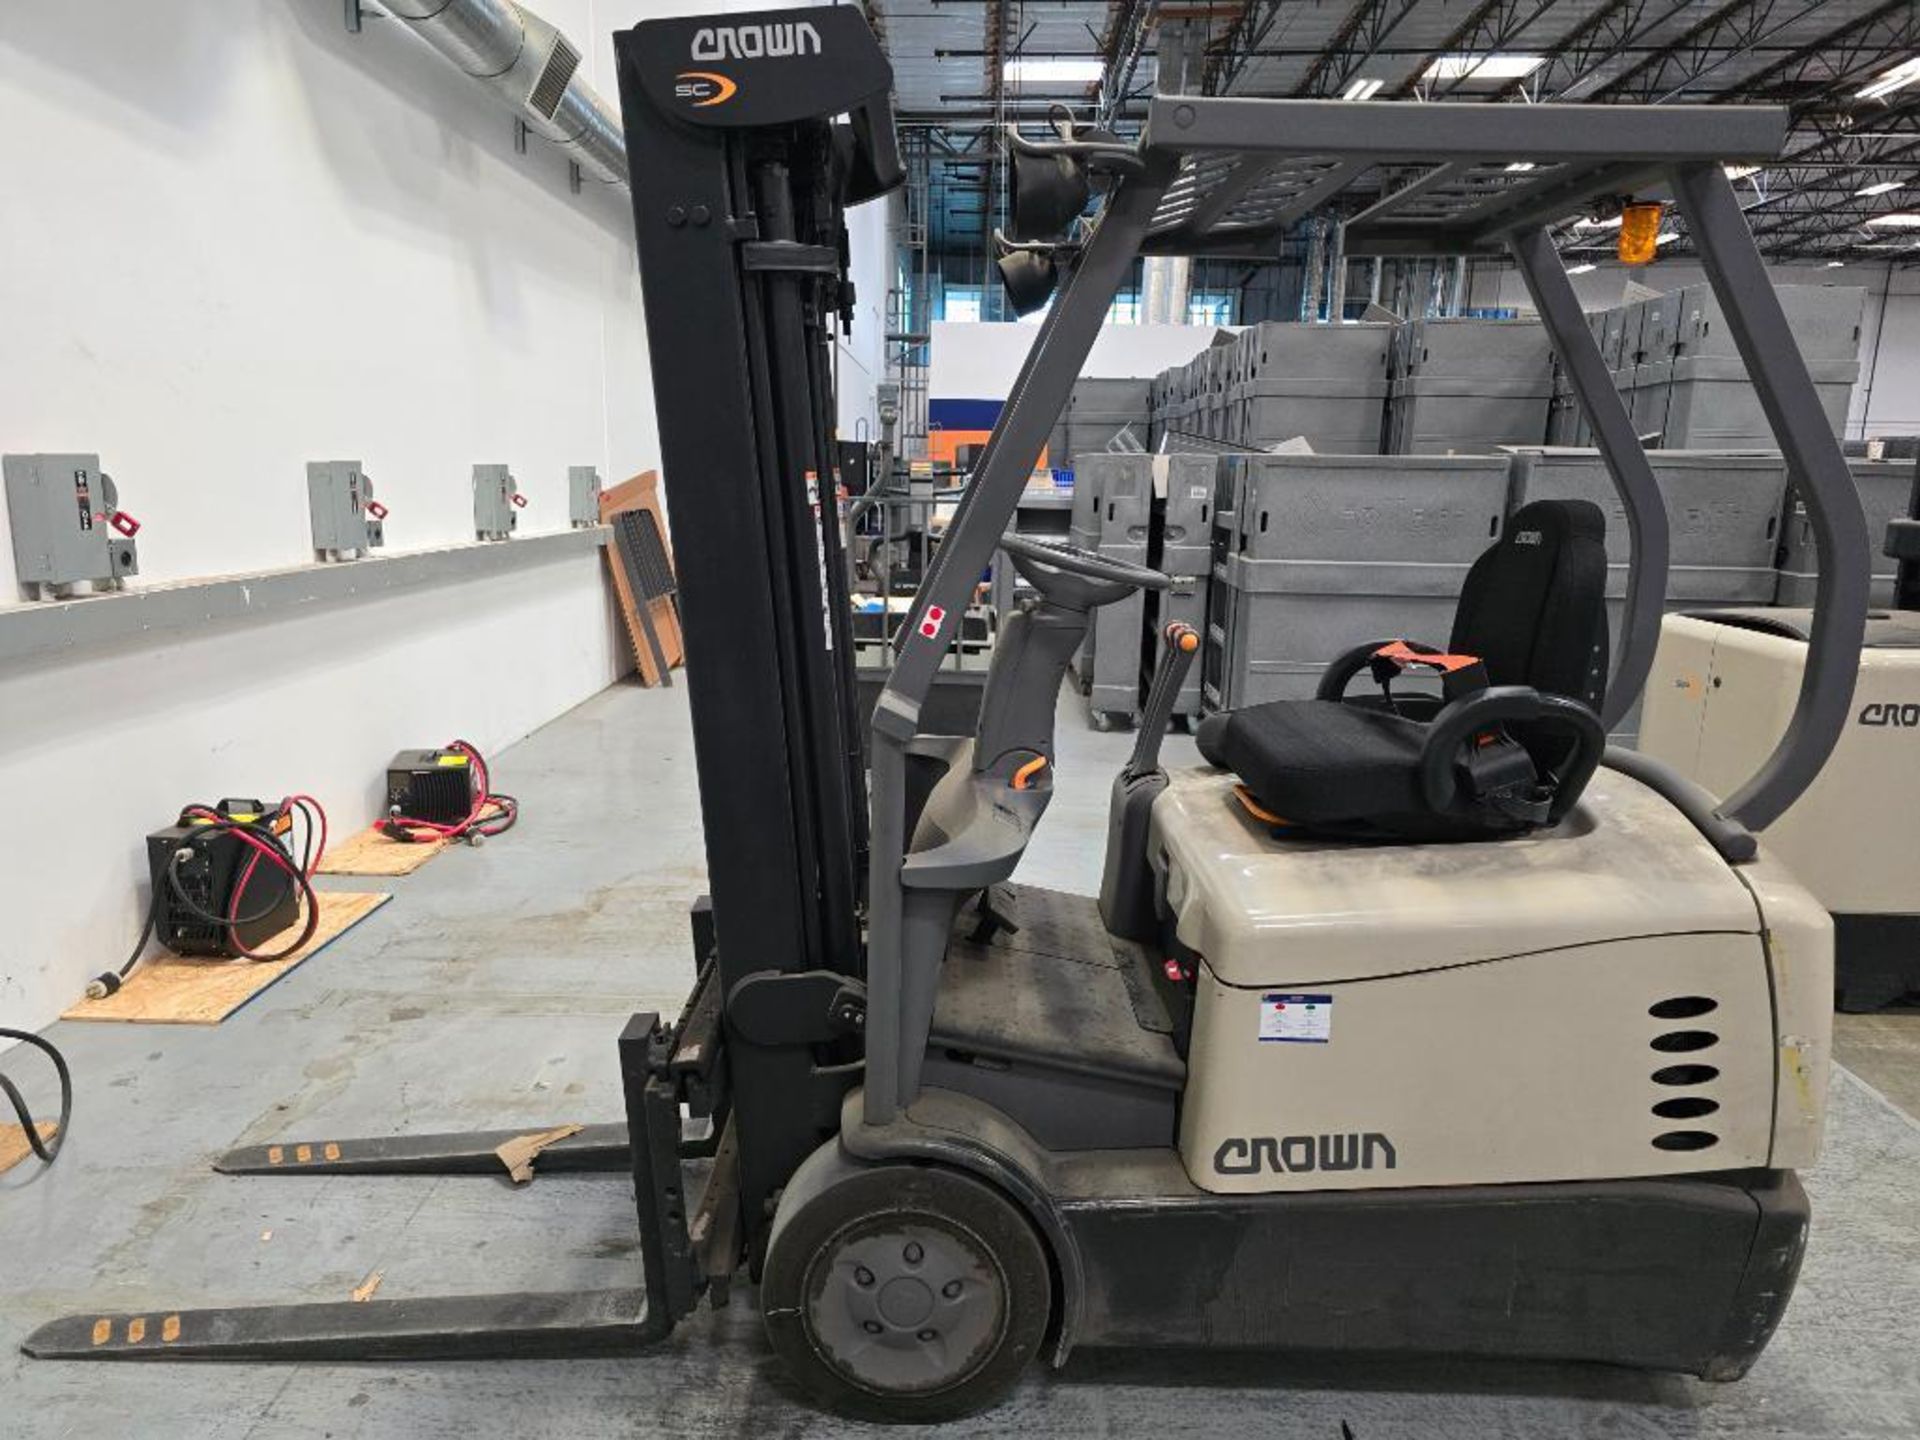 2011 Crown 2,850-LB. Capacity 3-Wheel Electric Forklift, Model: SC 5200 Series, S/N: 9A189853. 190" - Image 2 of 15